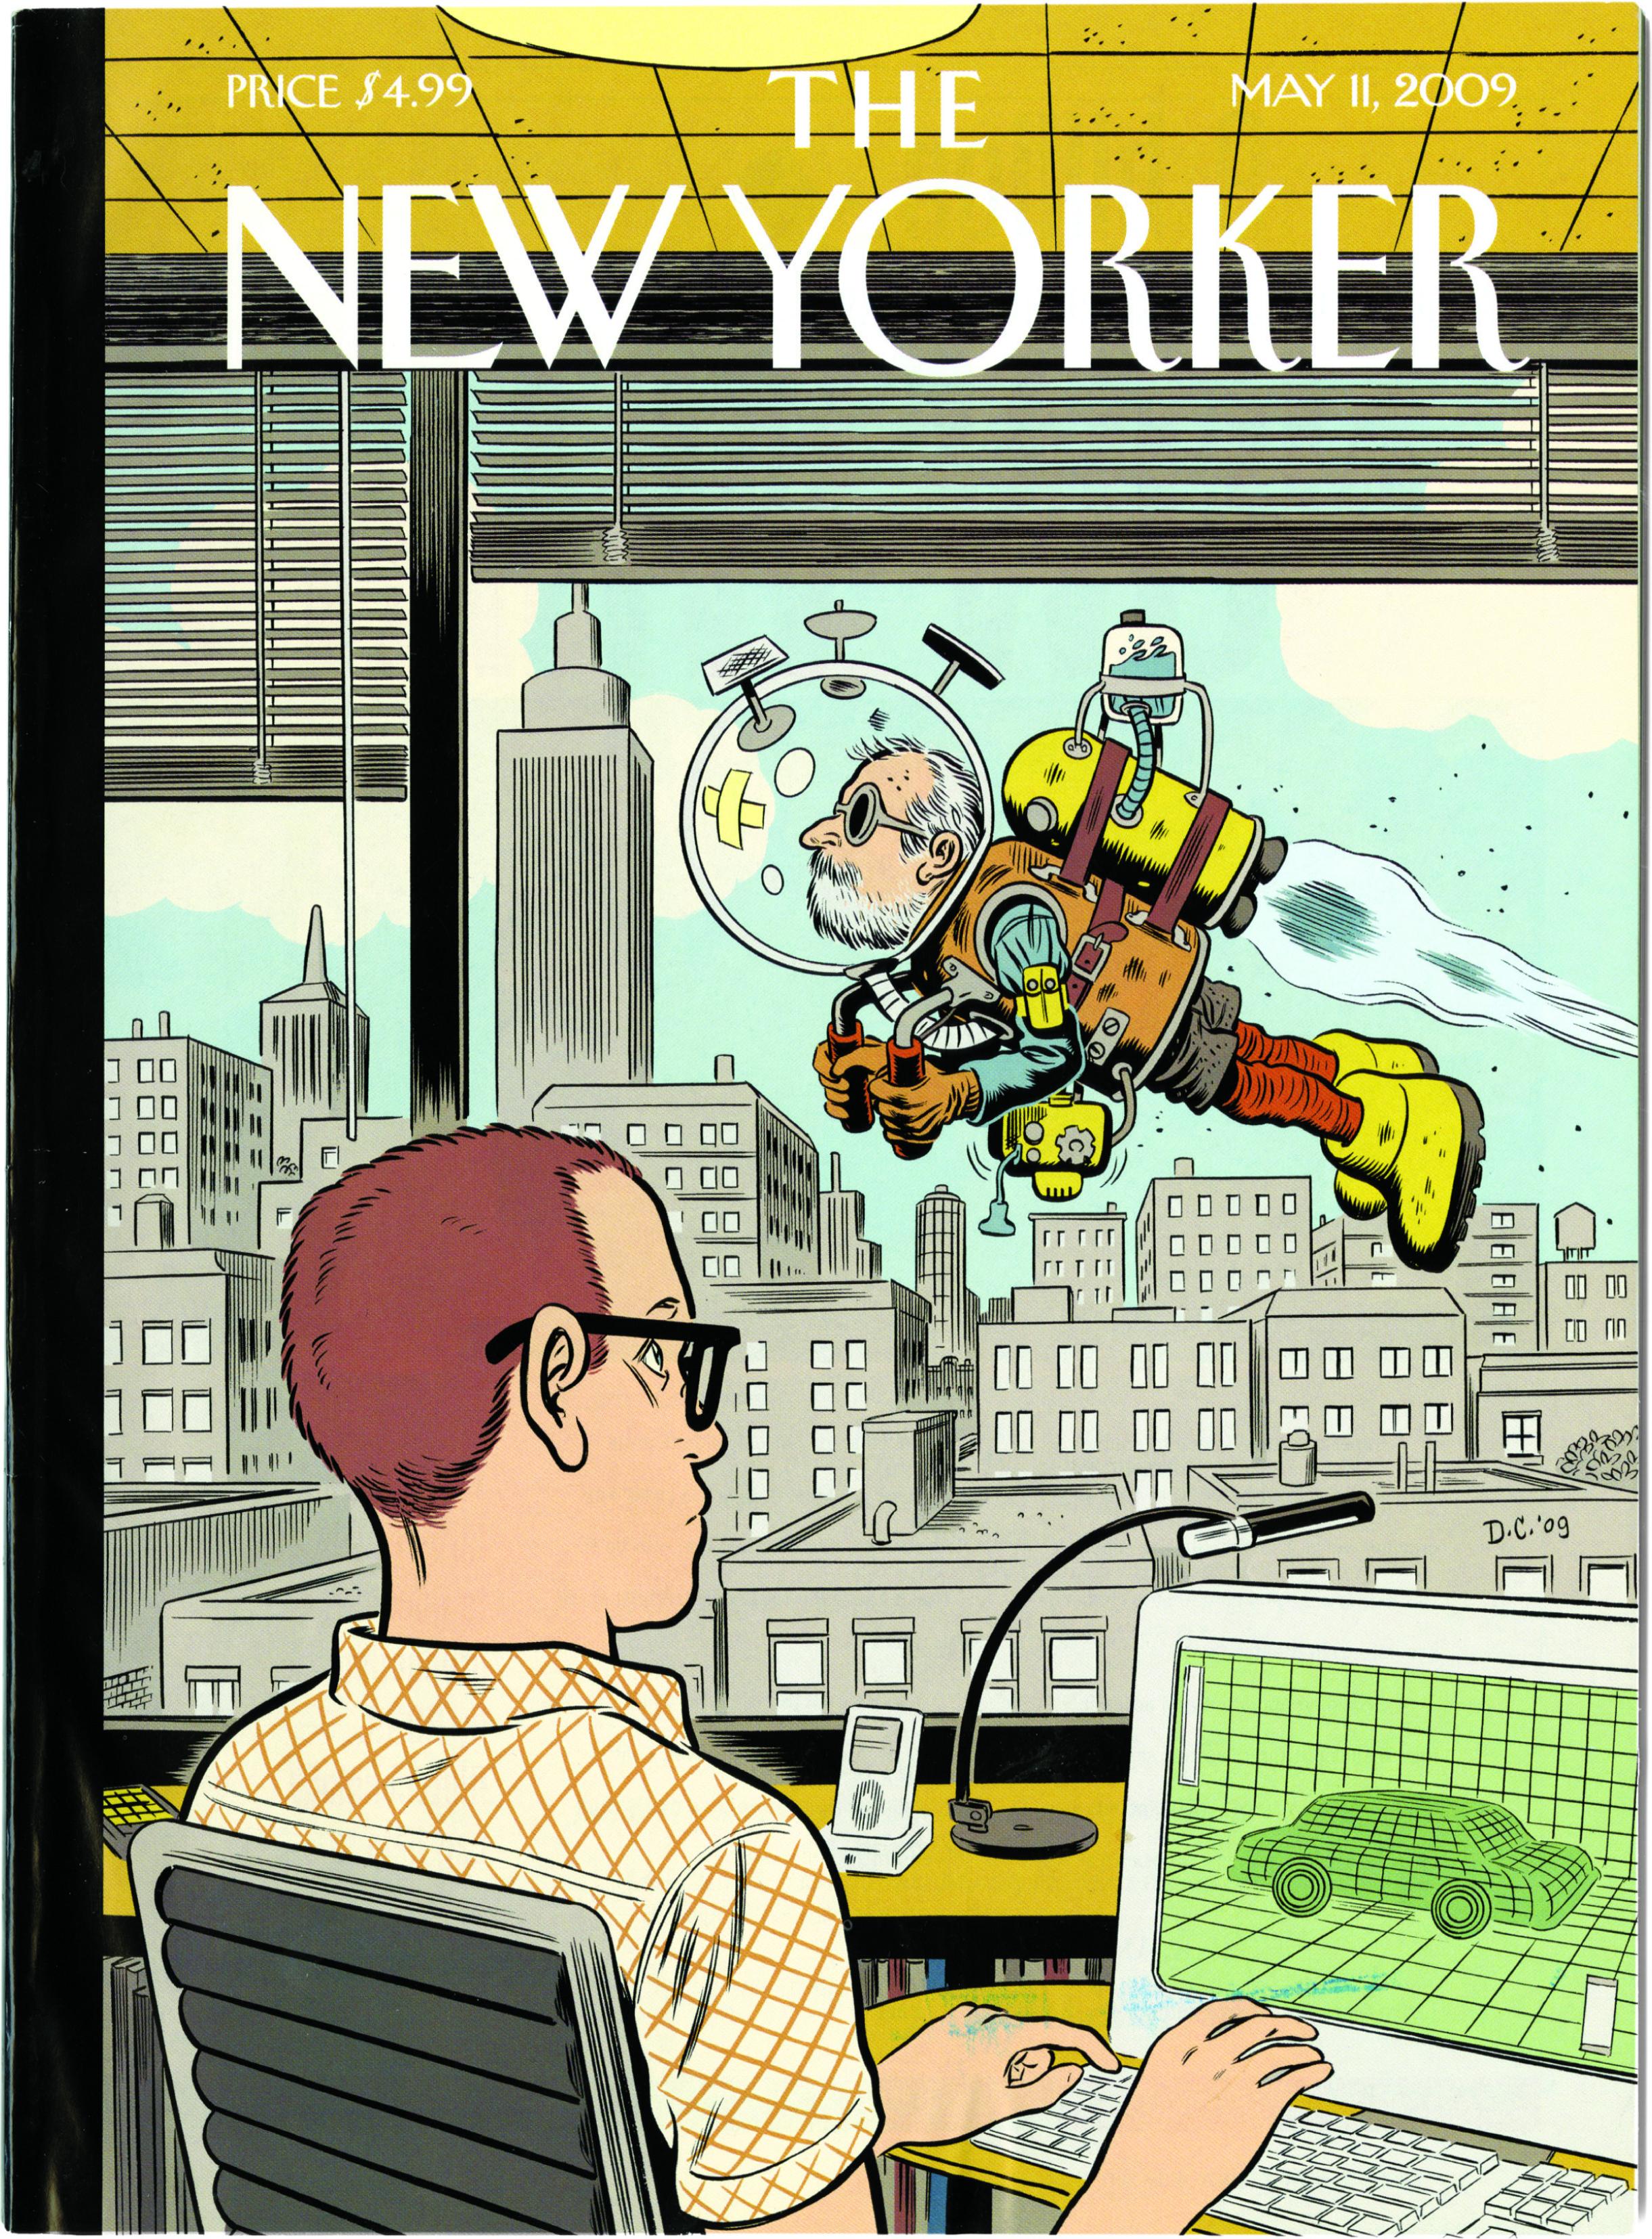 A cover of "The New Yorker" features an illustration of an office worker watching a person in a homemade space suit fly in front of the office window.